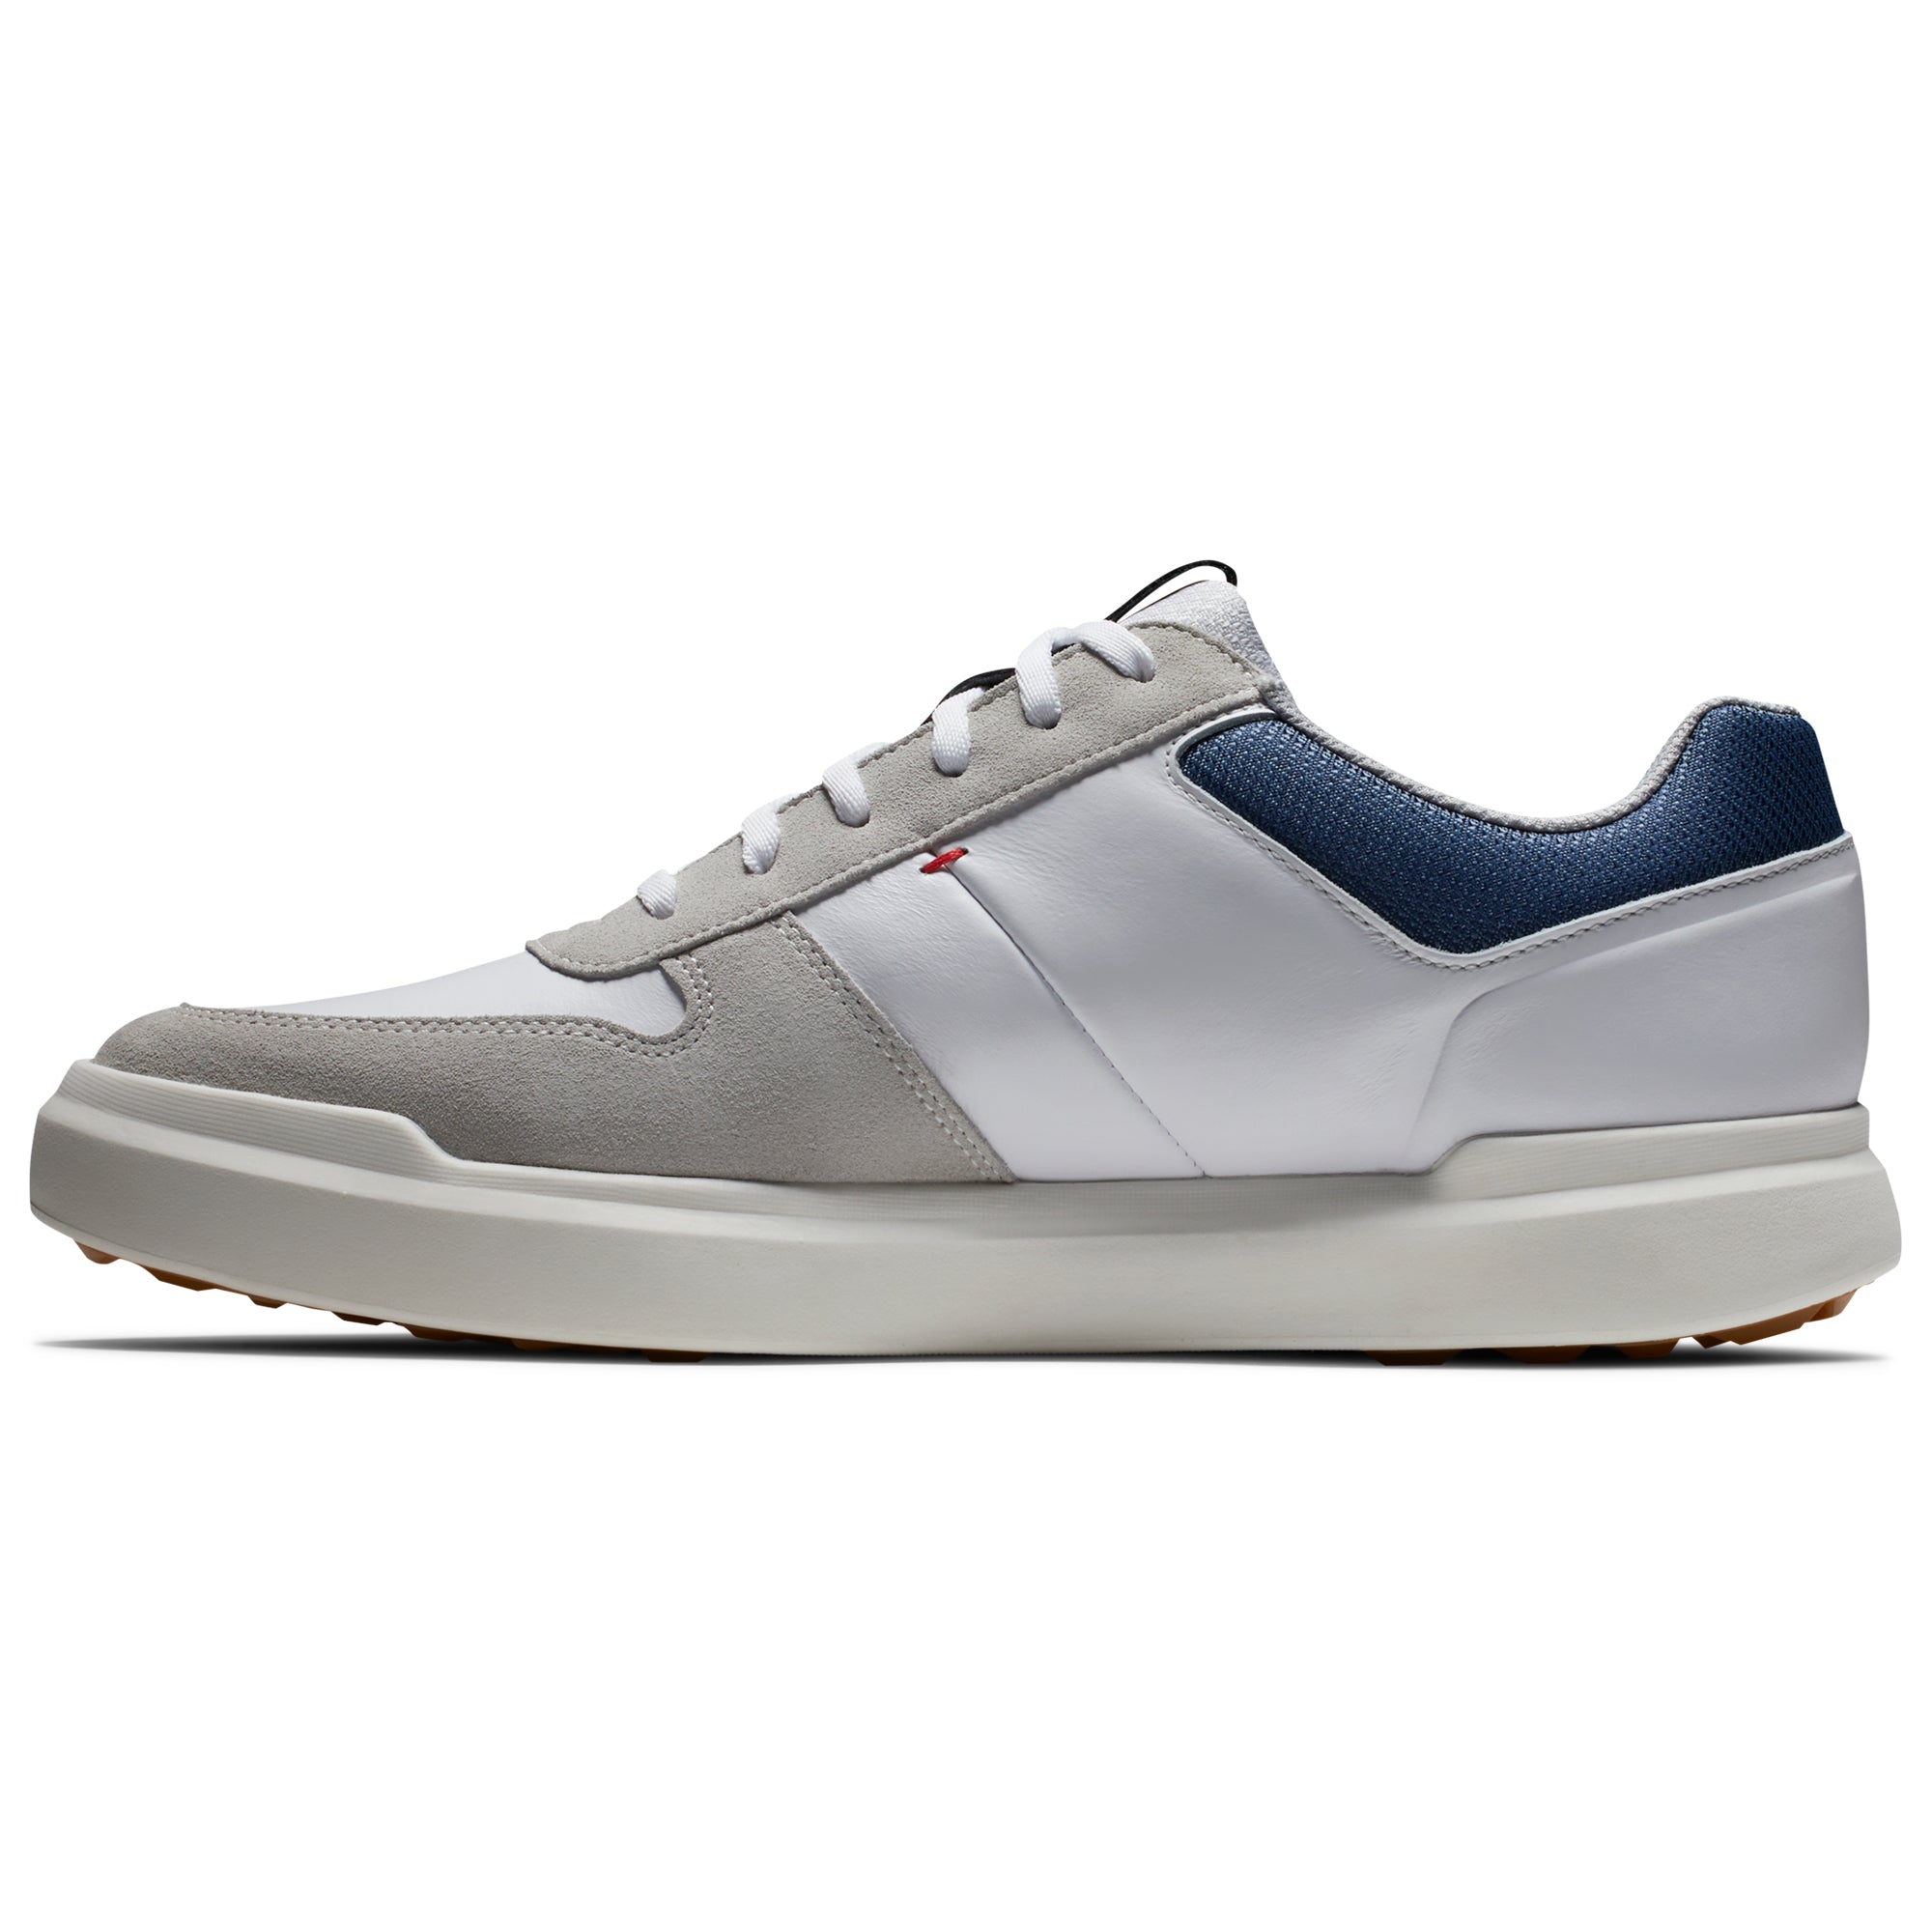 footjoy-contour-casual-golf-shoes-54374-white-navy-grey